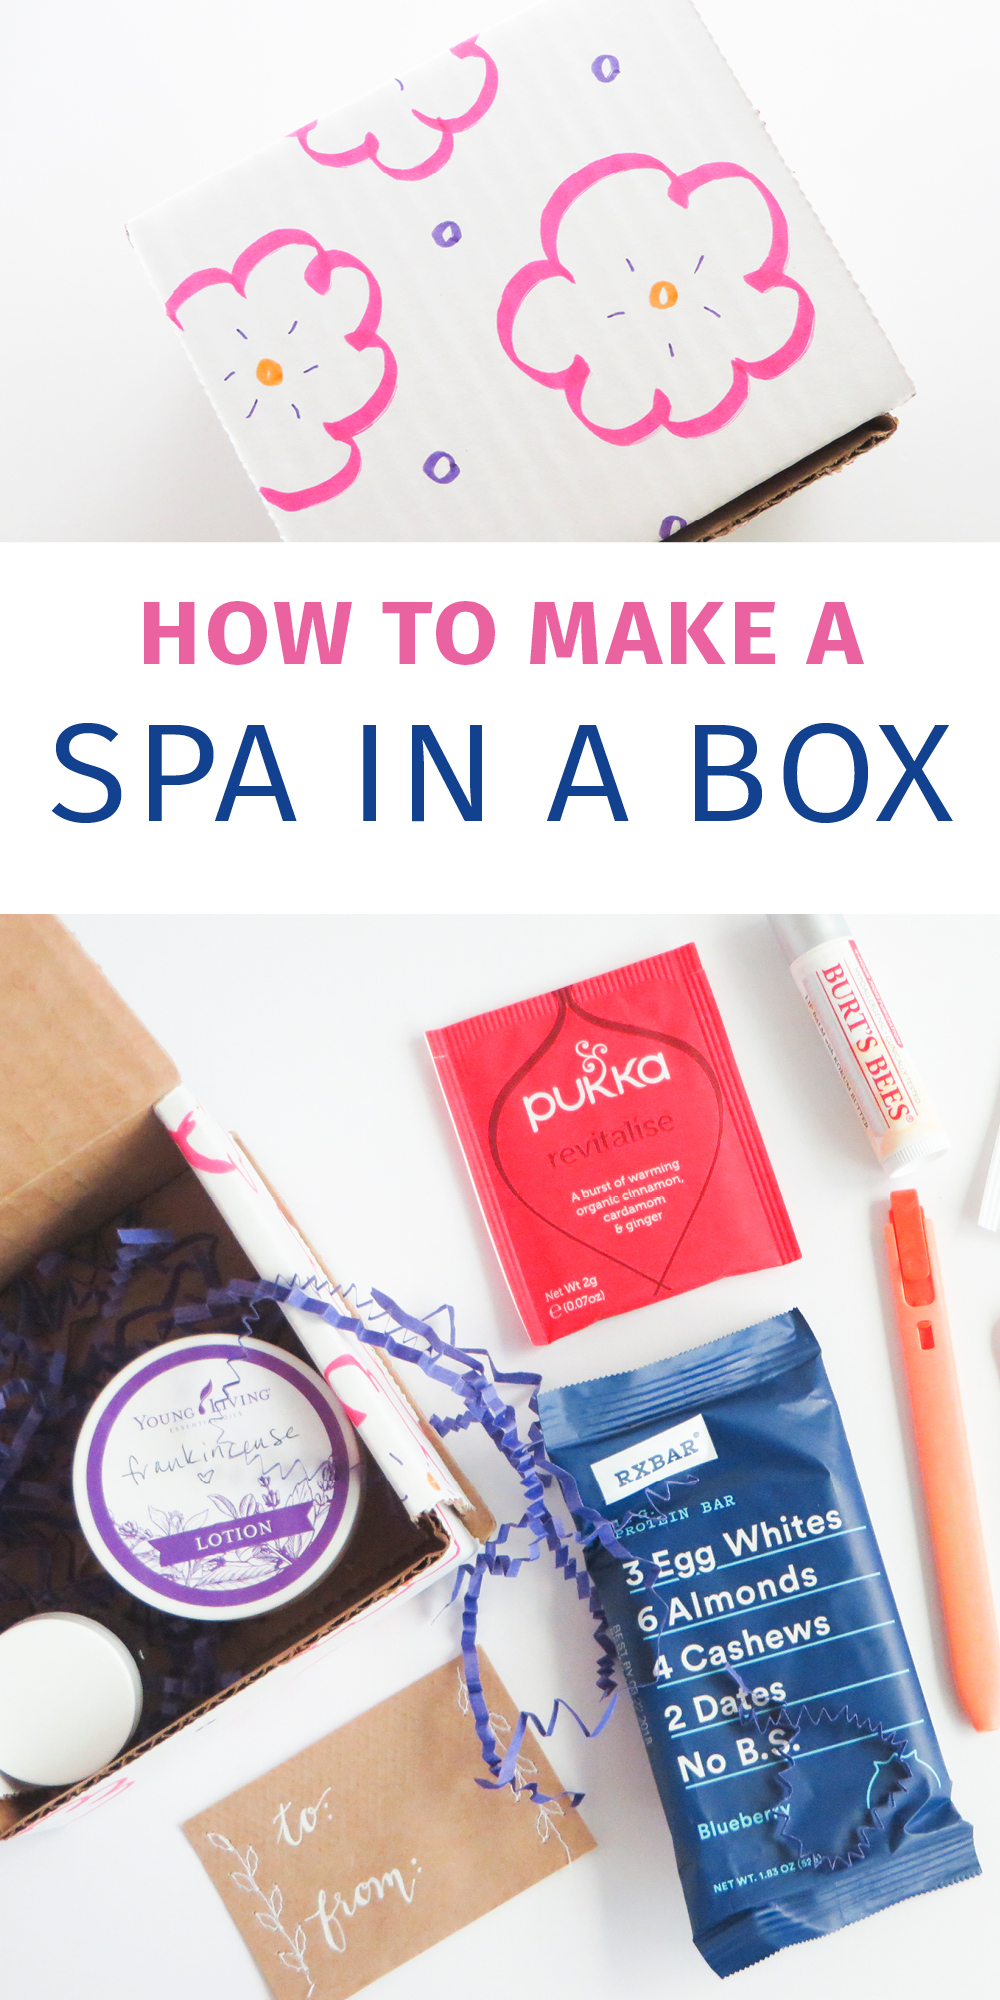 How to Make a Spa in a Box (Care Package 101)